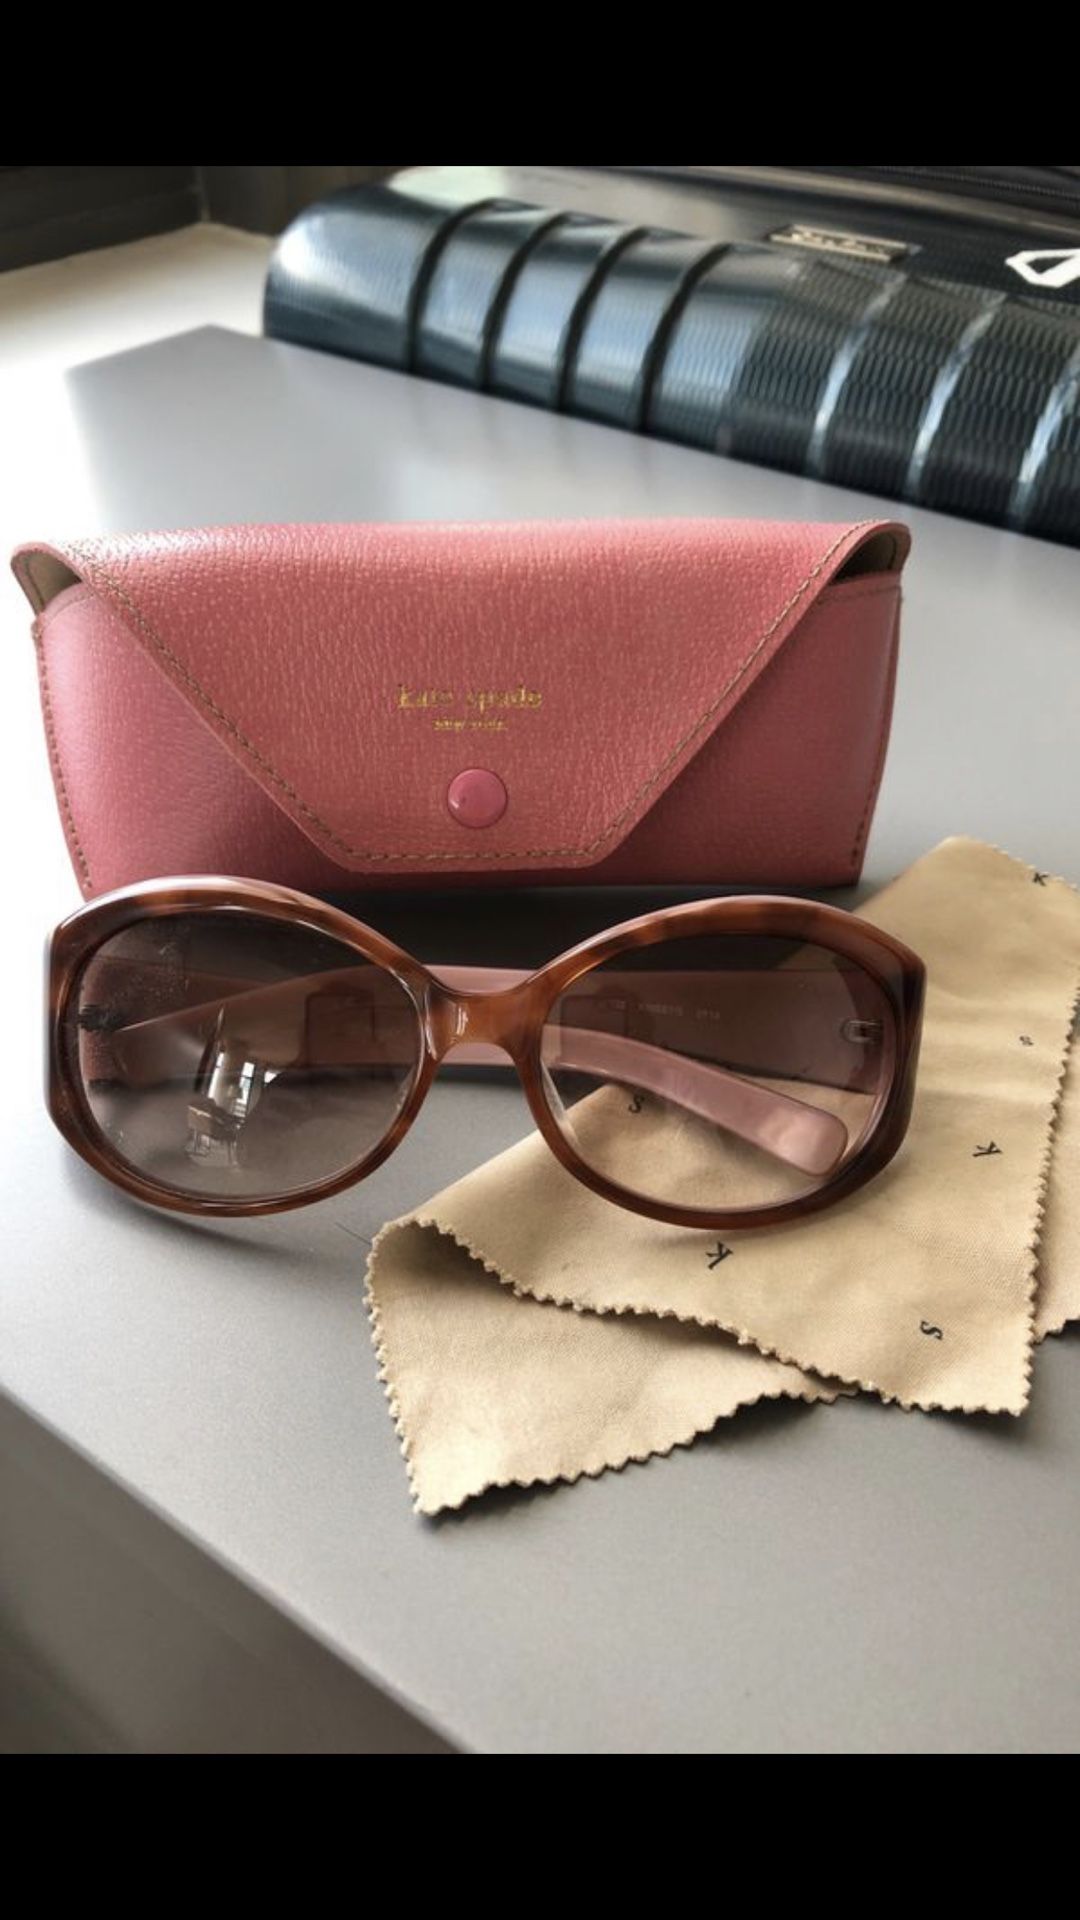 Kate Spade - dusty rose pink sunglasses - authentic